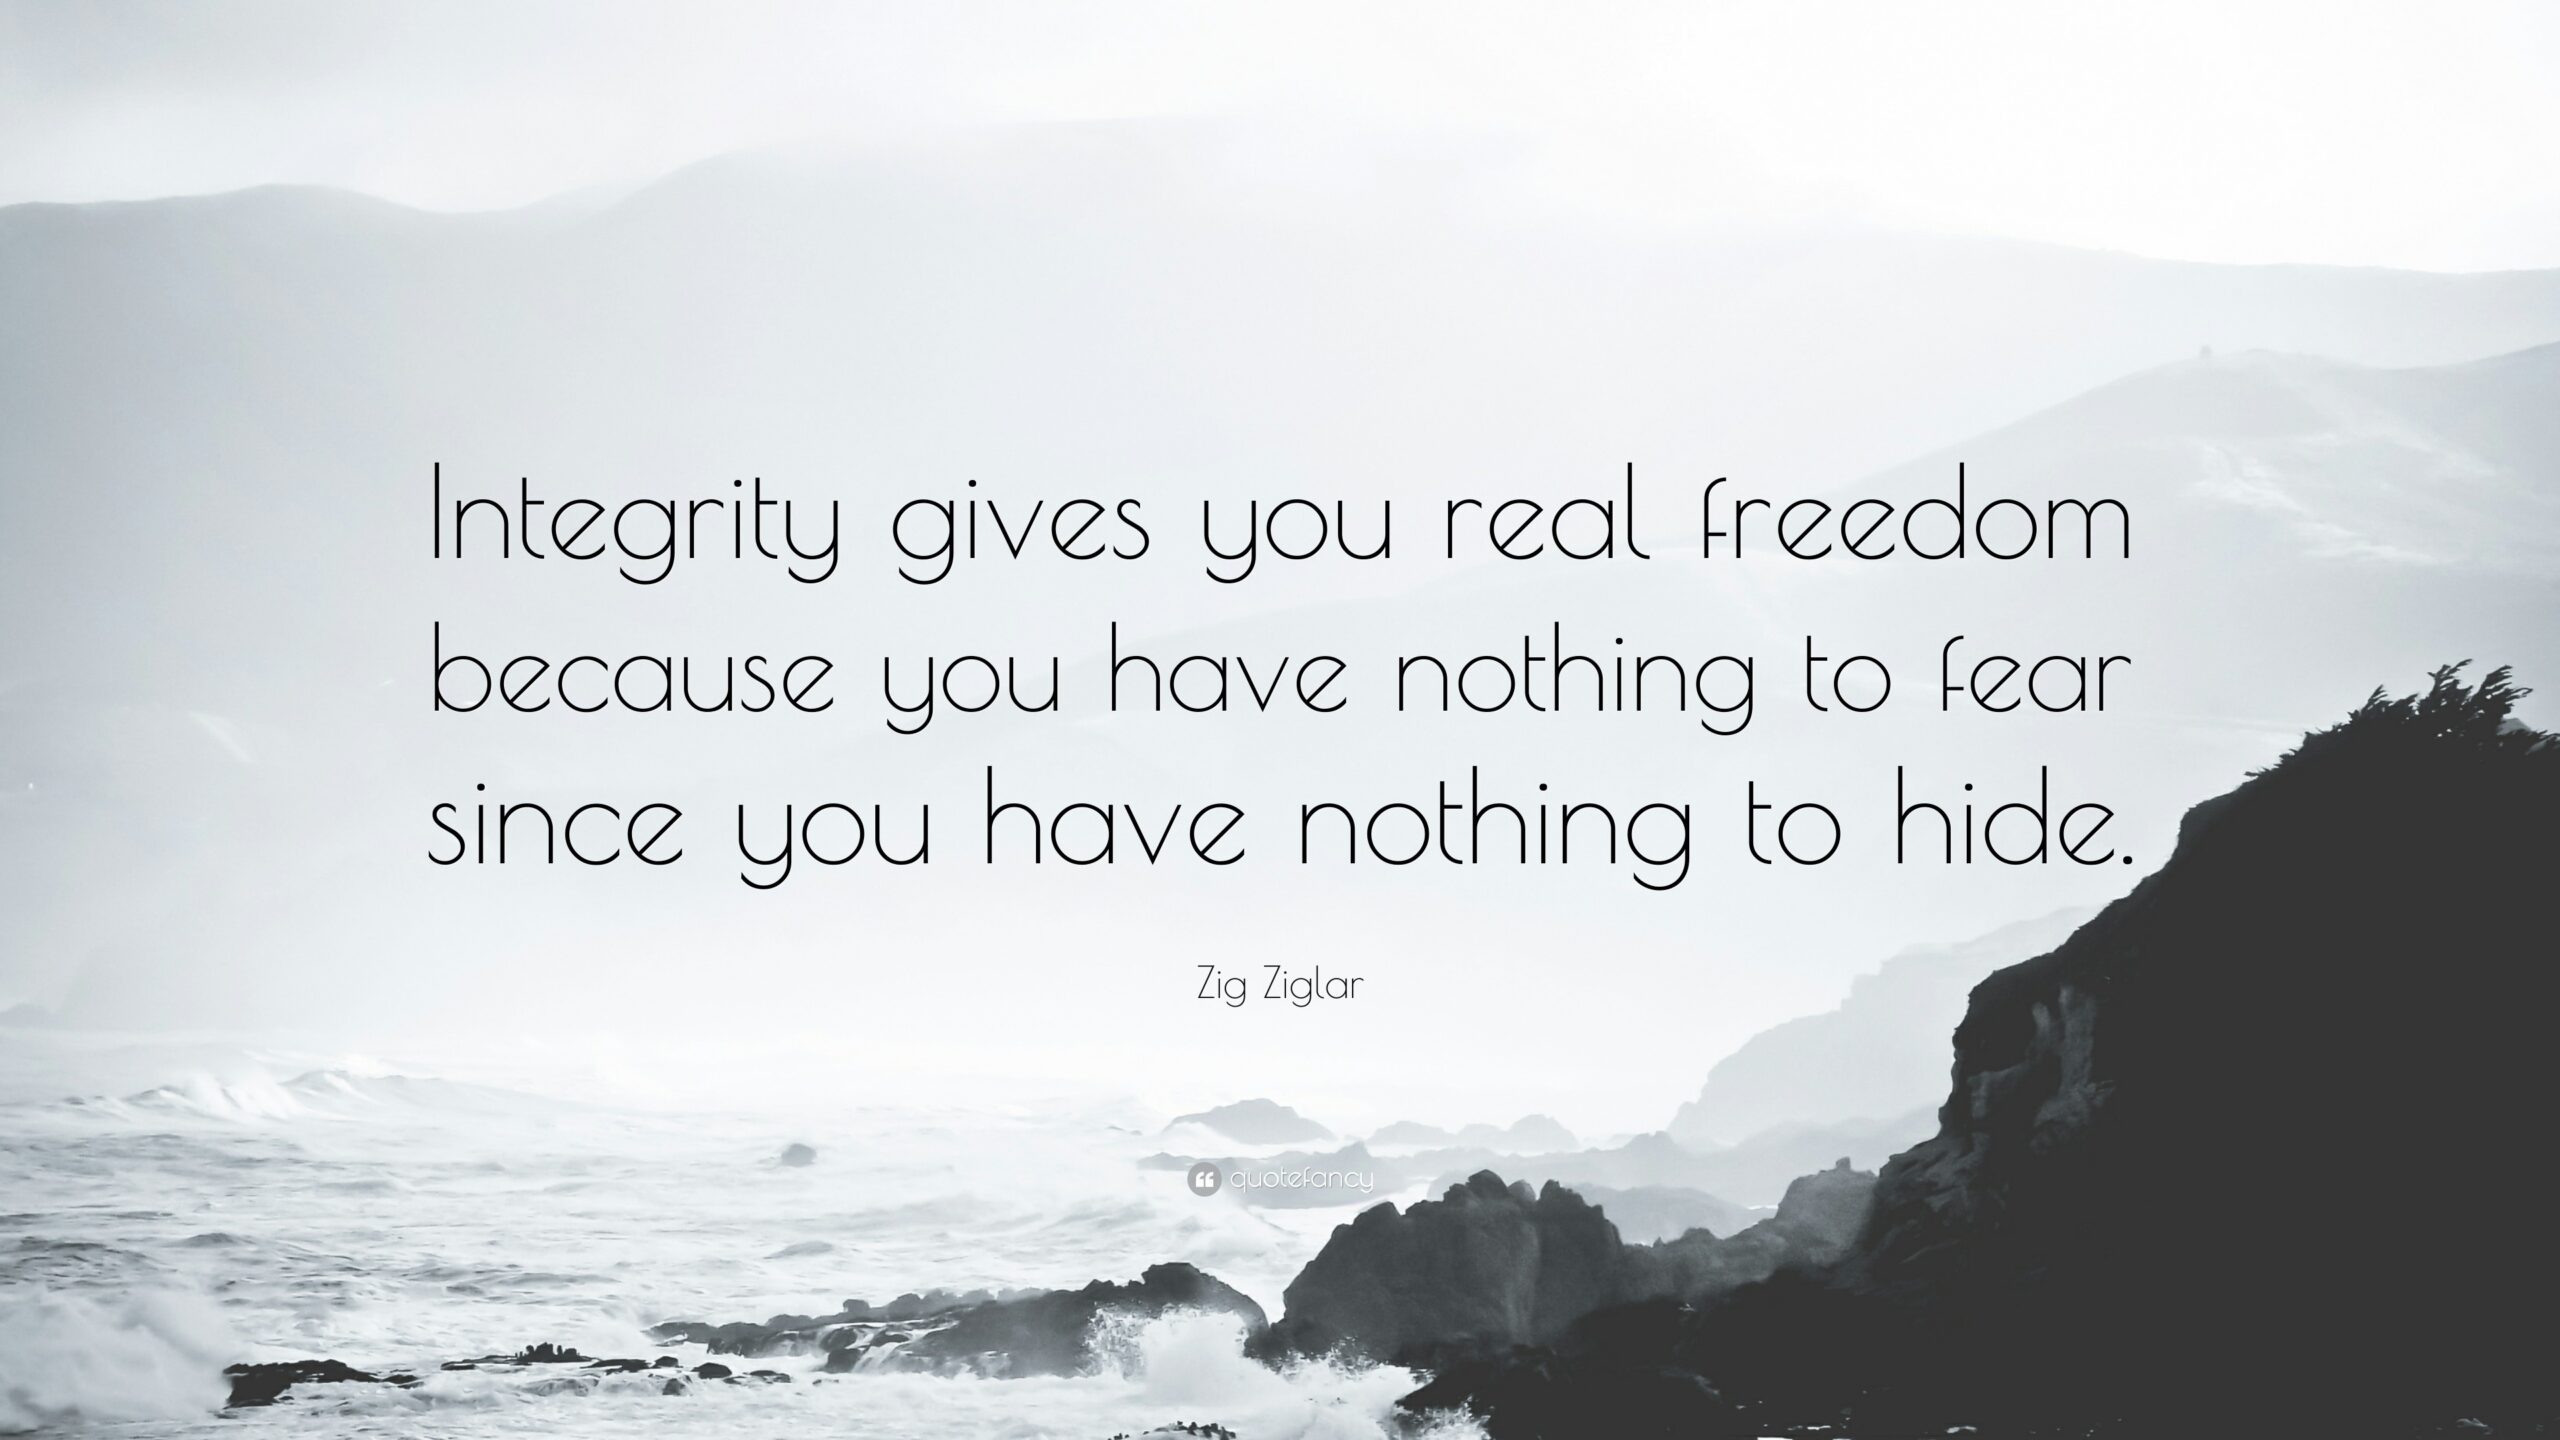 Quotes About Being Real Not Fake Integrity Gives You Real Freedom Because You Have